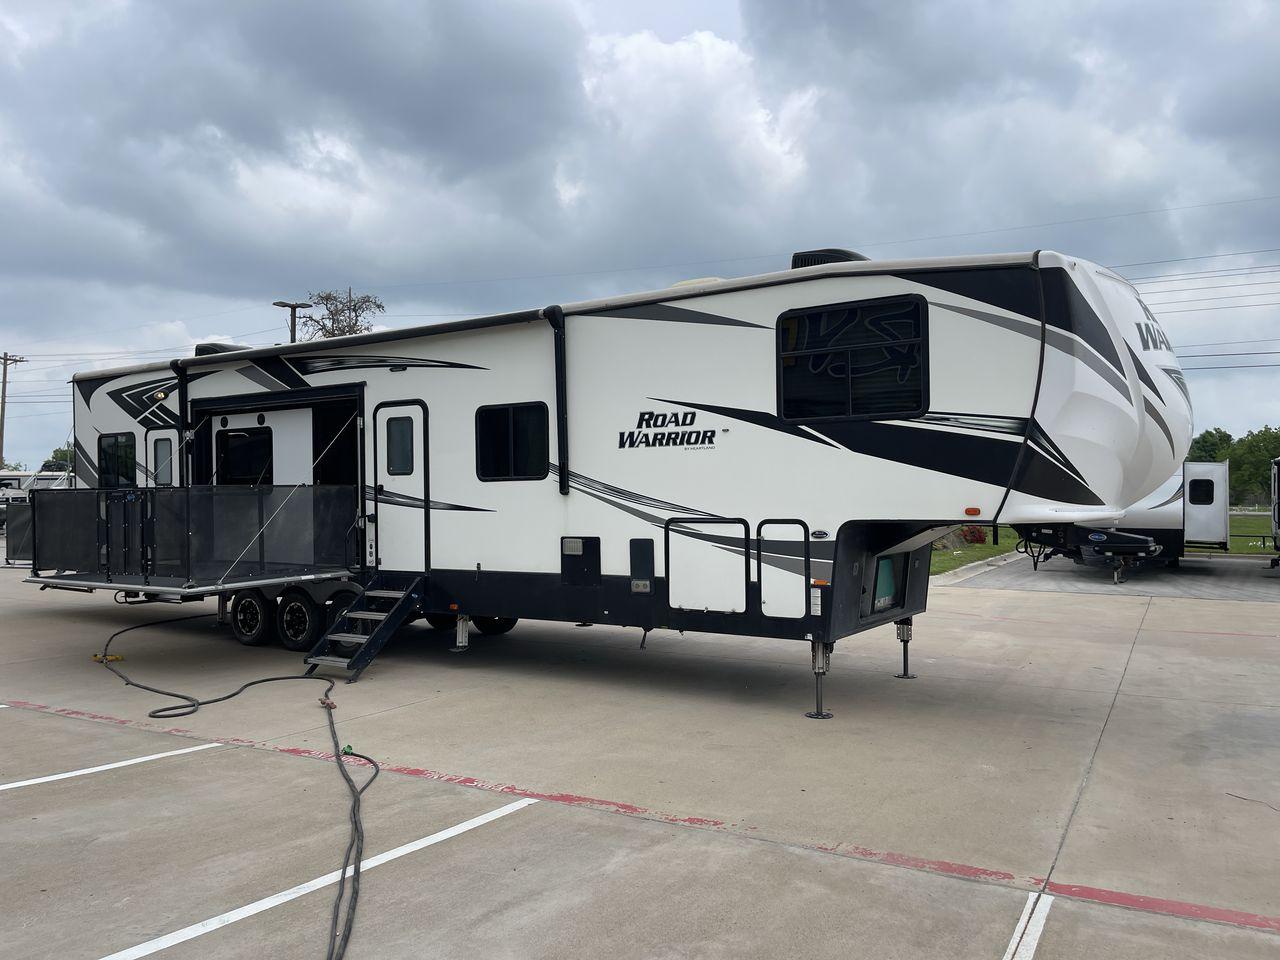 2019 HEARTLAND ROAD WARRIOR 427RW (5SFCG4435KE) , Length: 44.08 ft. | Dry Weight: 16,400 lbs. | Gross Weight: 20,000 lbs. | Slides: 2 transmission, located at 4319 N Main Street, Cleburne, TX, 76033, (817) 221-0660, 32.435829, -97.384178 - The 2019 Heartland Road Warrior 427RW fifth wheel toy hauler is ready for your next journey. The length of this amazing RV is 44.08 feet, its dry weight is 16,400 lbs and its gross weight is 20,000 lbs. This makes it stable and long-lasting on the road. This RV is strong and stylish, with two slides - Photo #28